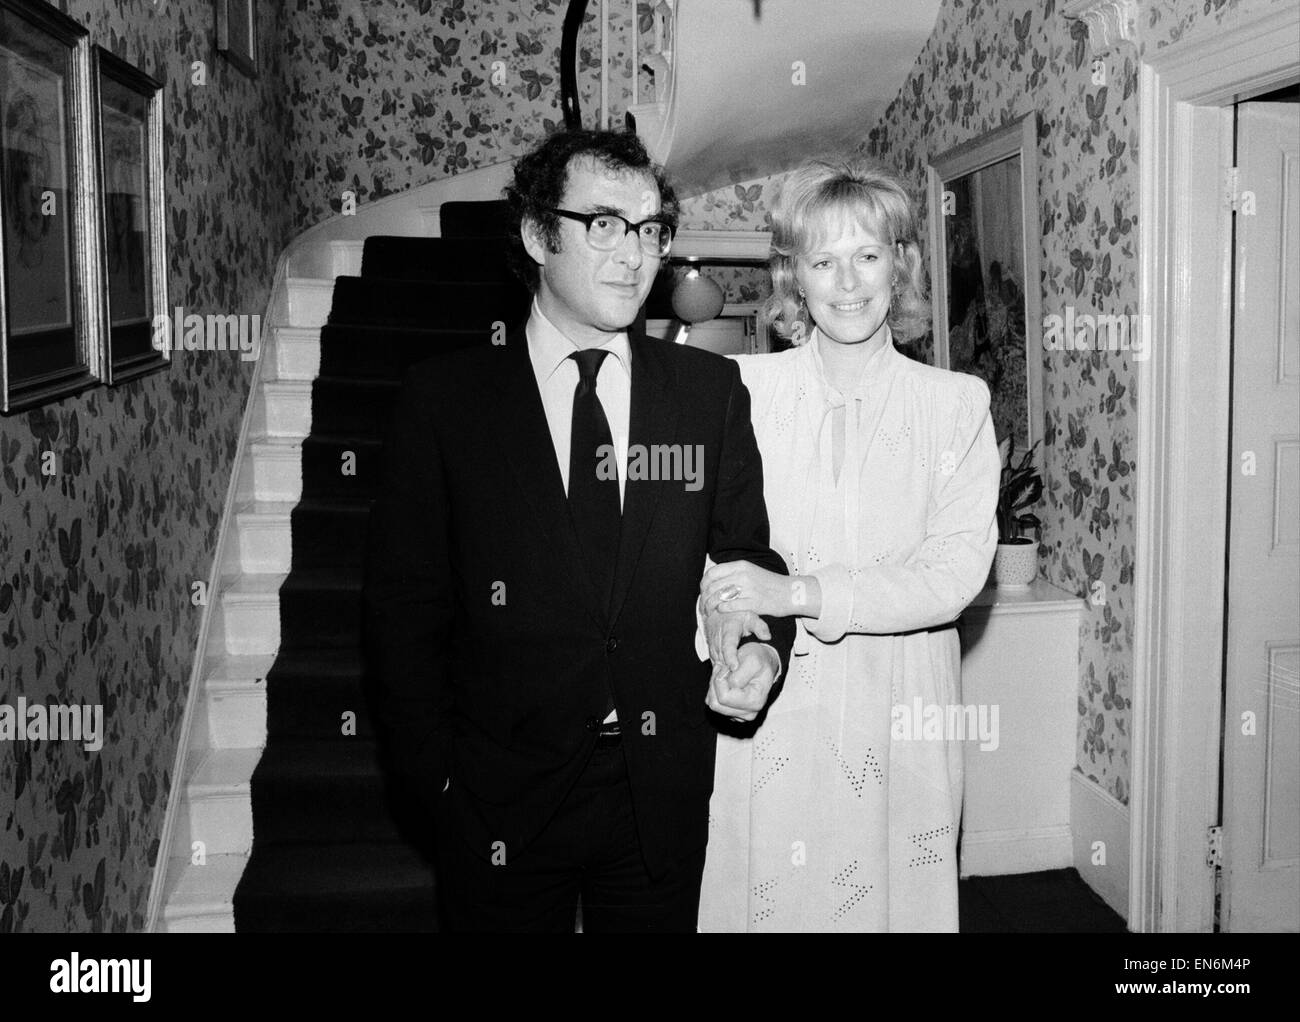 Playwright Harold Pinter and author Lady Antonia Fraser pictured together in the hallway of their house, 9th October 1980. It was reported that the couple have secretly married and after the ceremony they went back to a party at her home. Stock Photo